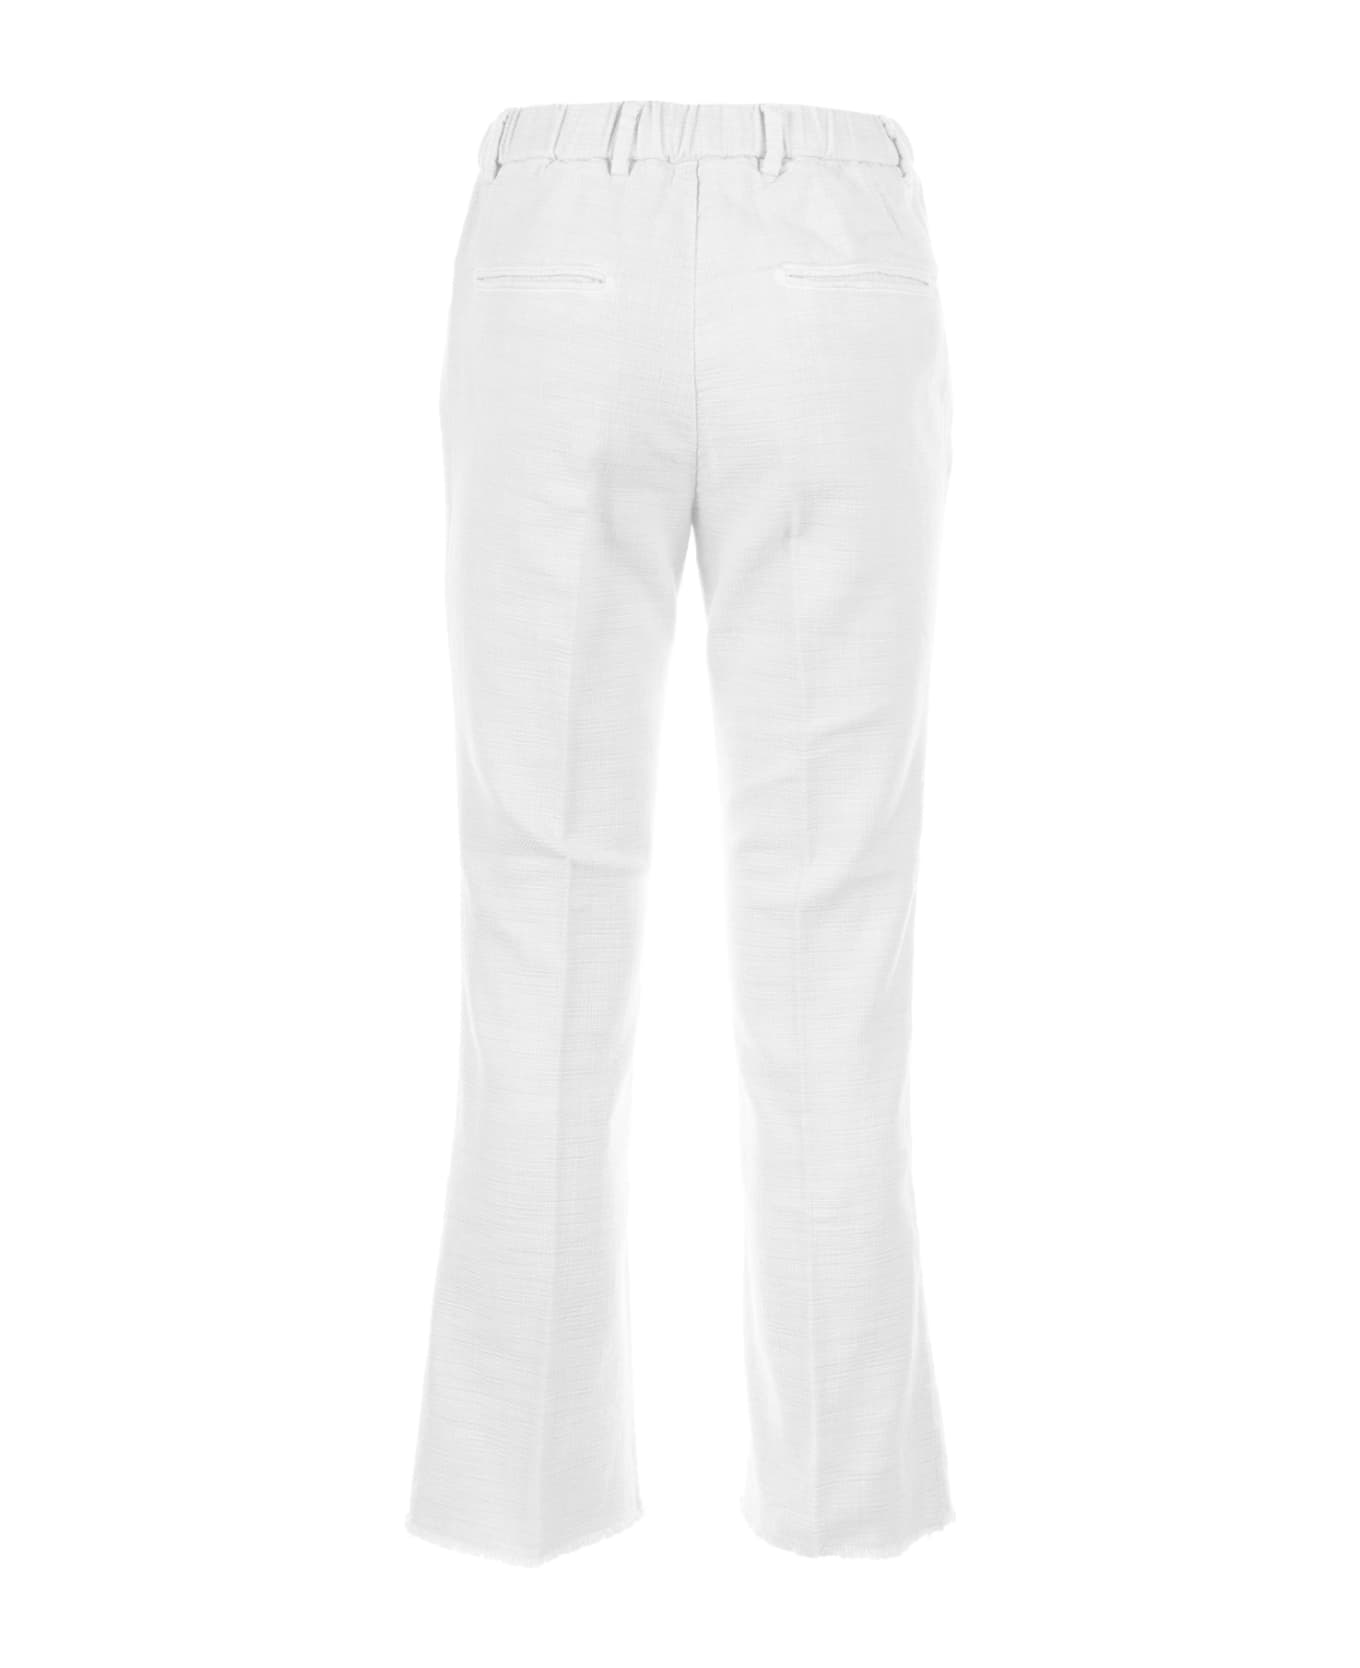 Myths Women's White Trousers - OFF WHITE